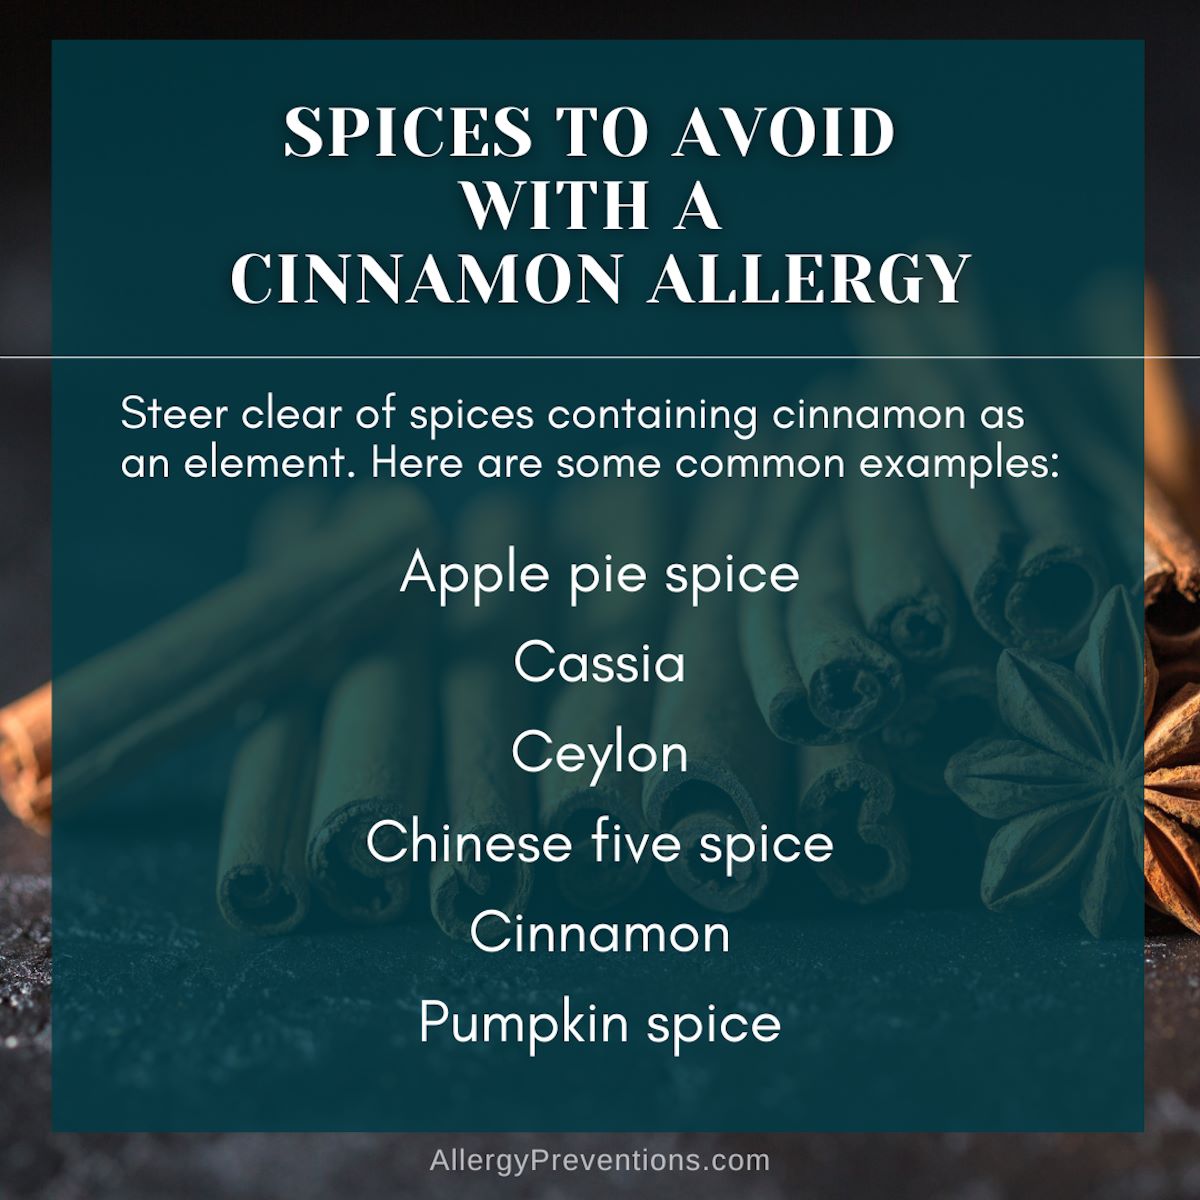 spices to avoid with a cinnamon allergy infographic. Steer clear of spices containing cinnamon as an element. Here are some common examples: Apple pie spice, Cassia, Ceylon, Chinese five spice, Cinnamon, Pumpkin spice.